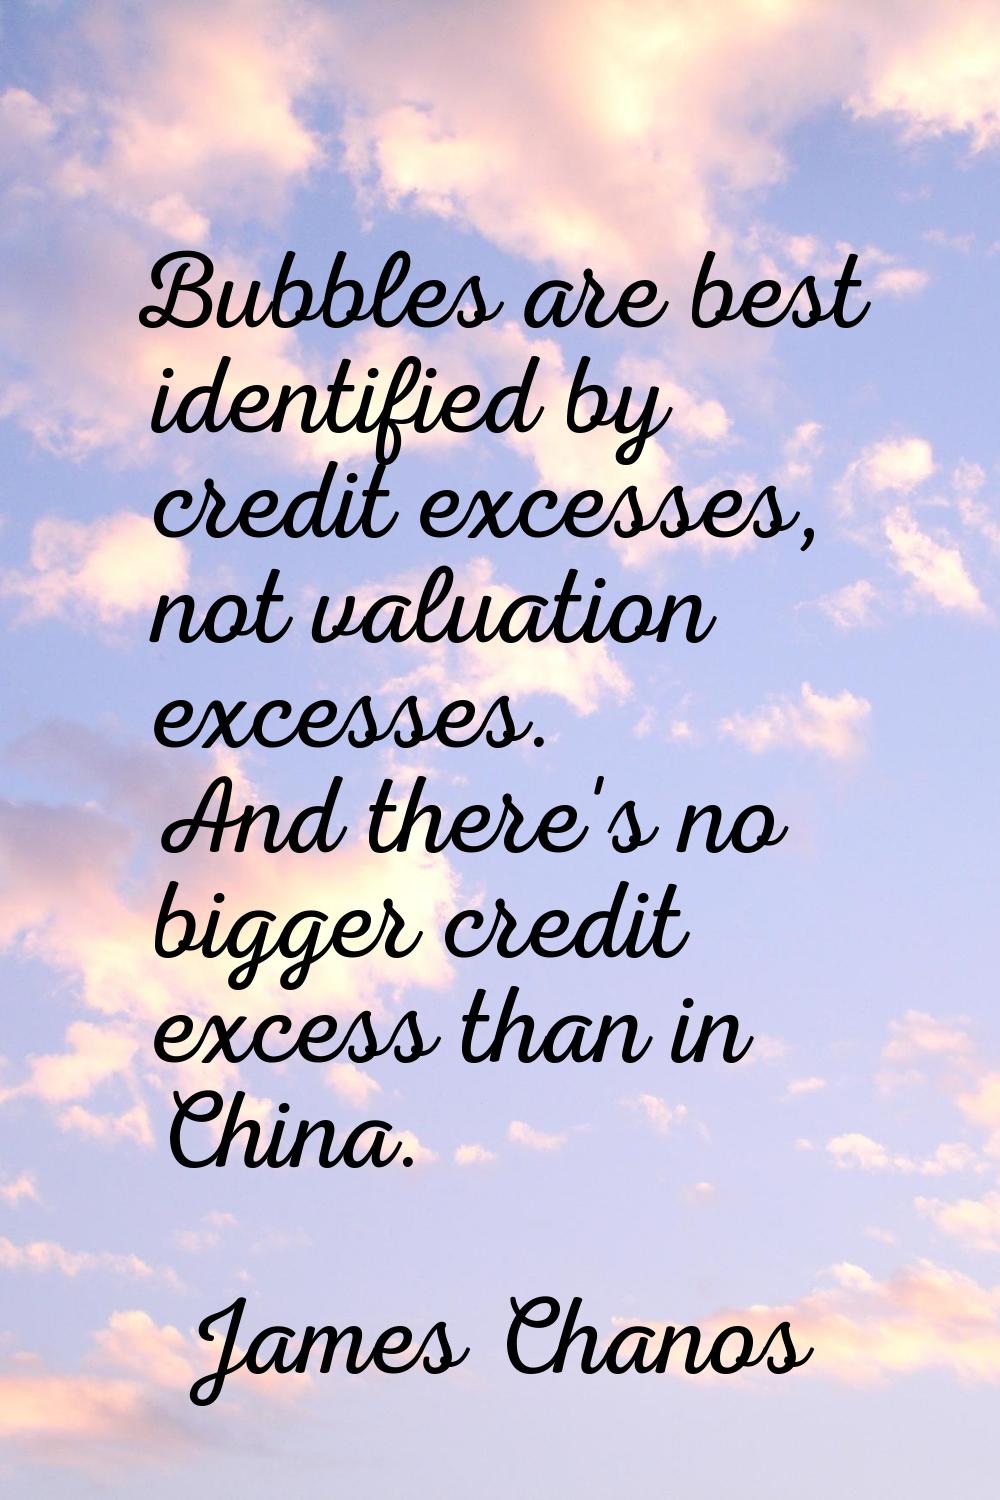 Bubbles are best identified by credit excesses, not valuation excesses. And there's no bigger credi